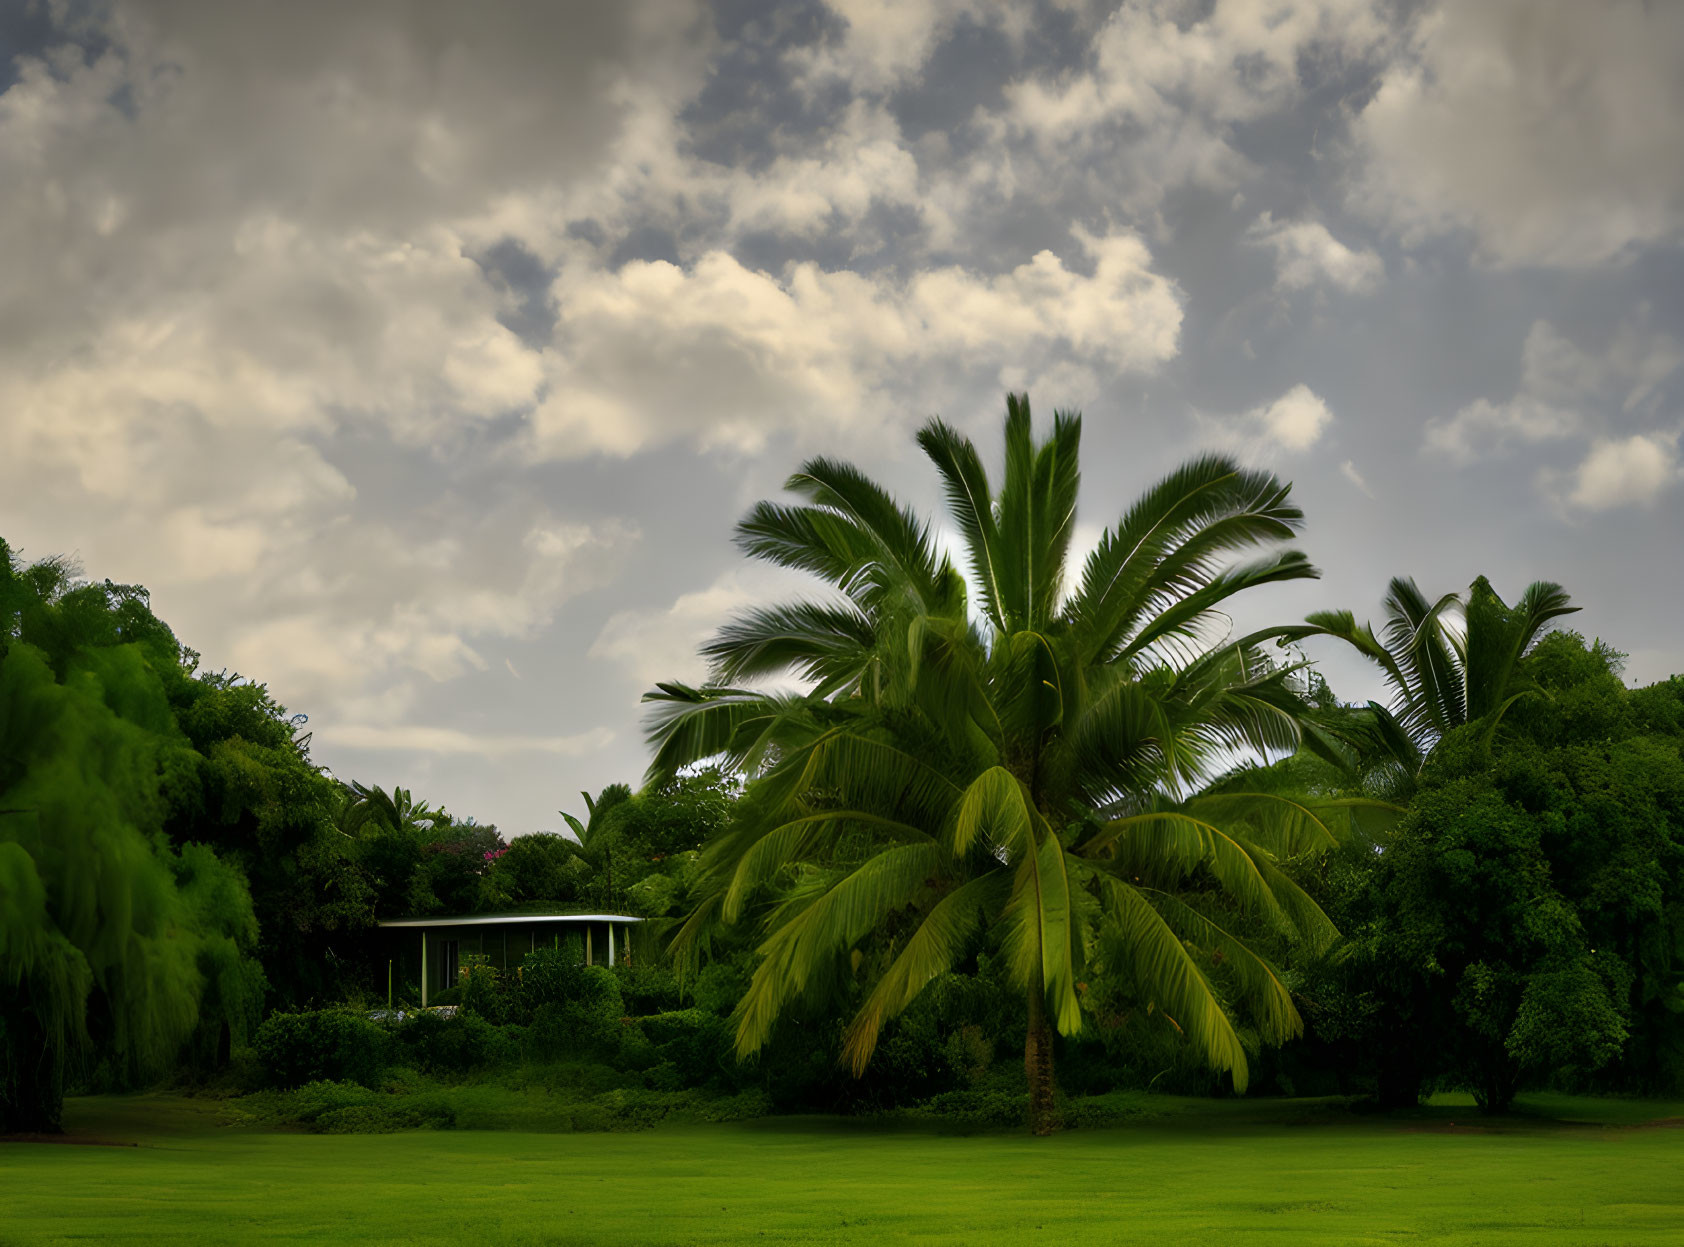 Tropical landscape with tall palm tree under moody sky and lush green foliage